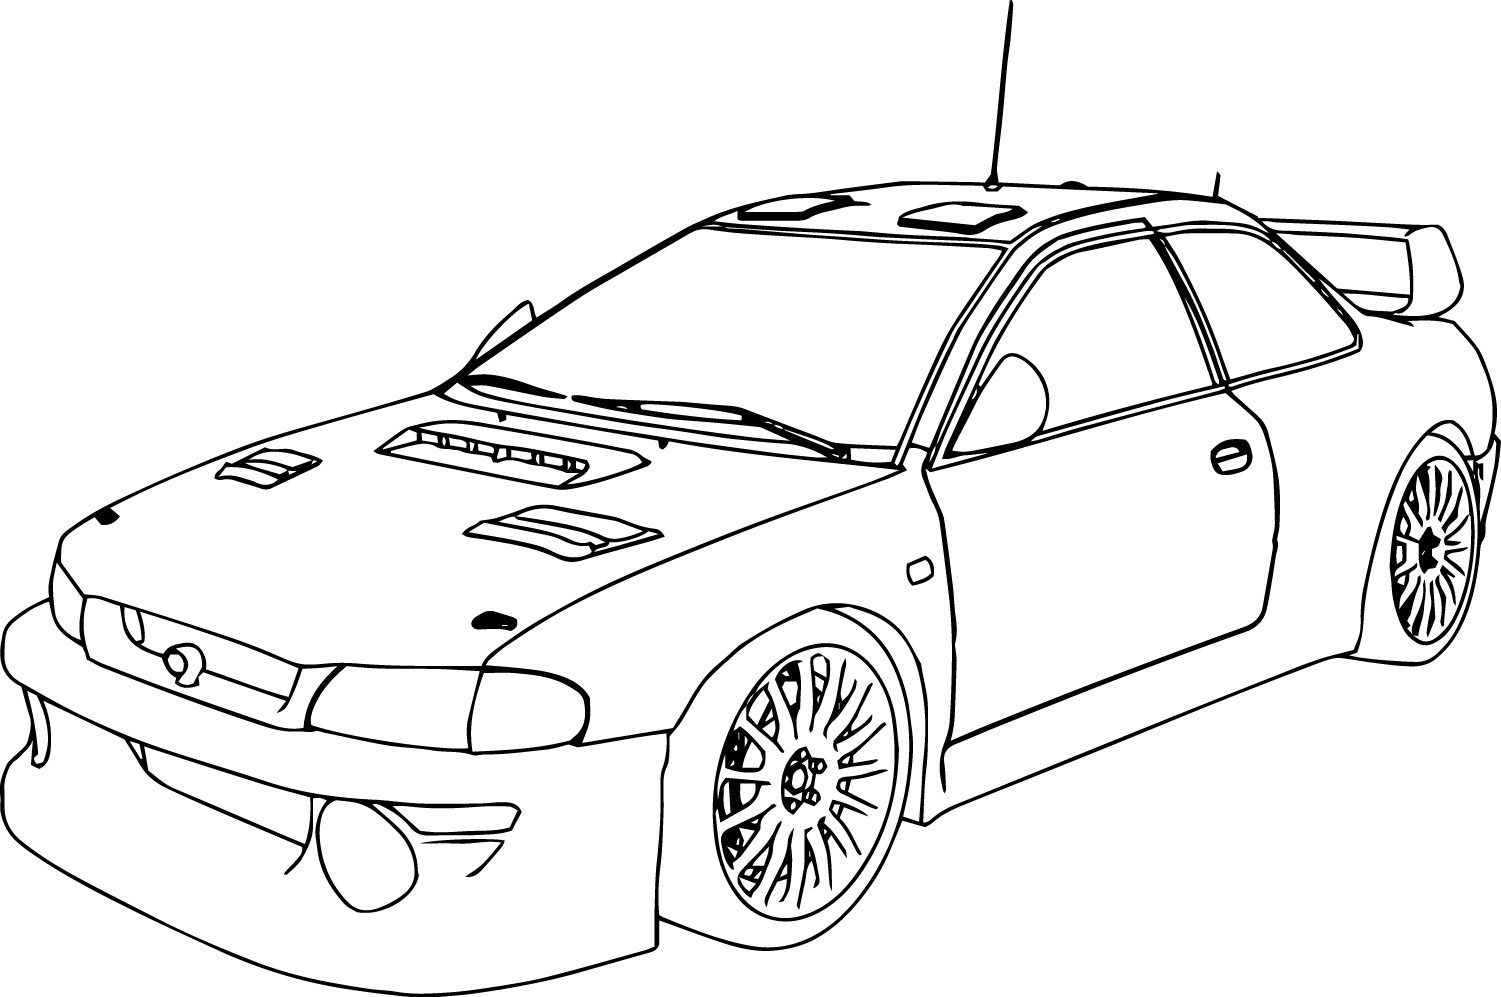 Download Race Car Coloring Pages To Print at GetDrawings.com | Free ...